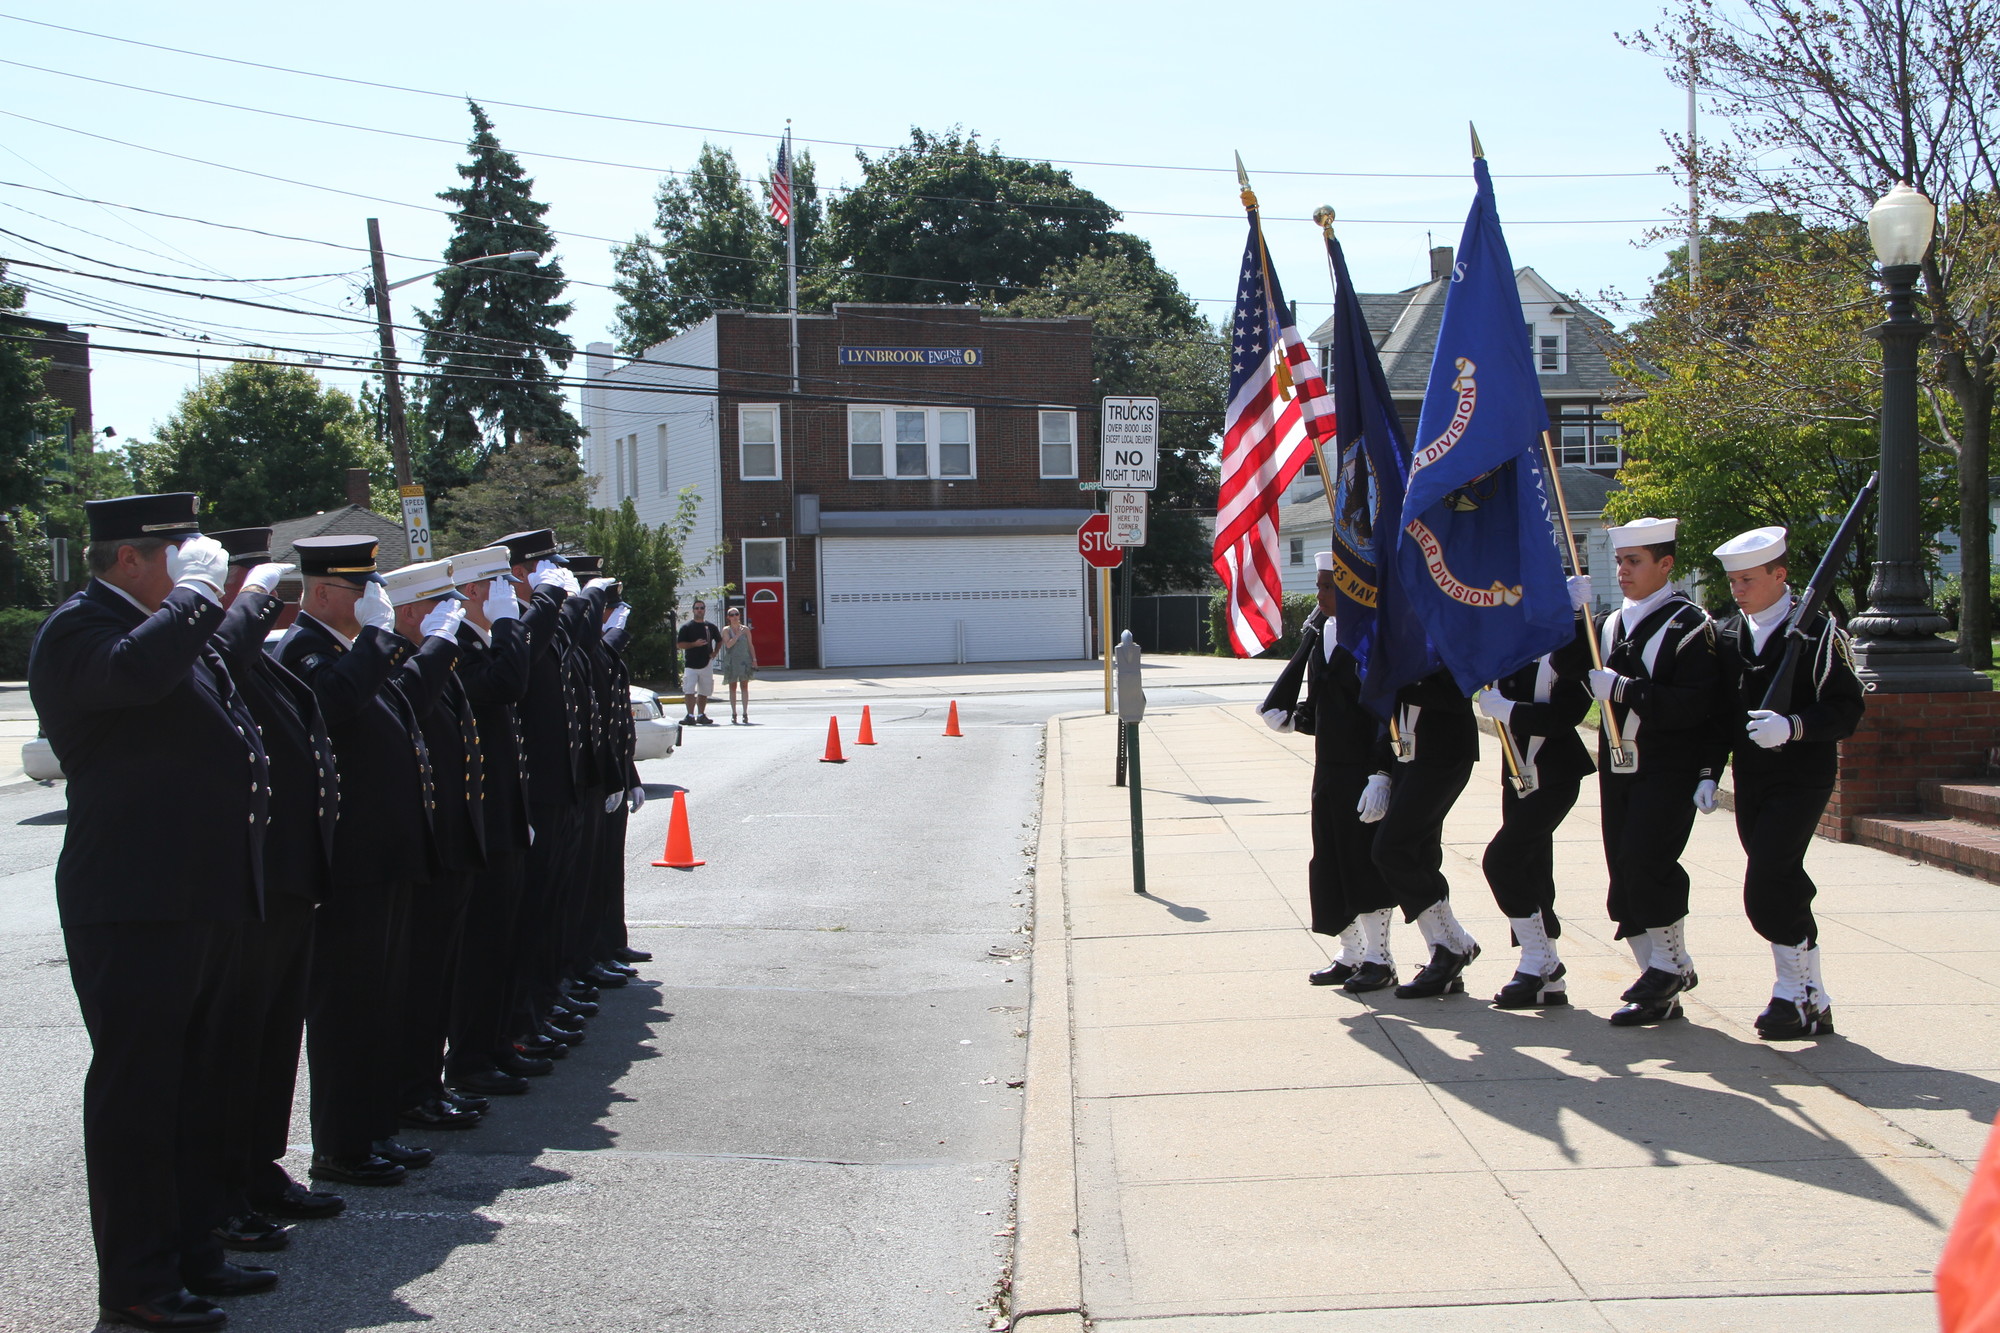 Lynbrook firefighters,   pmembers of Tally-Ho Engine 3, pictured at left, saluted the color guard, represented by the US Naval Sea Cadets.